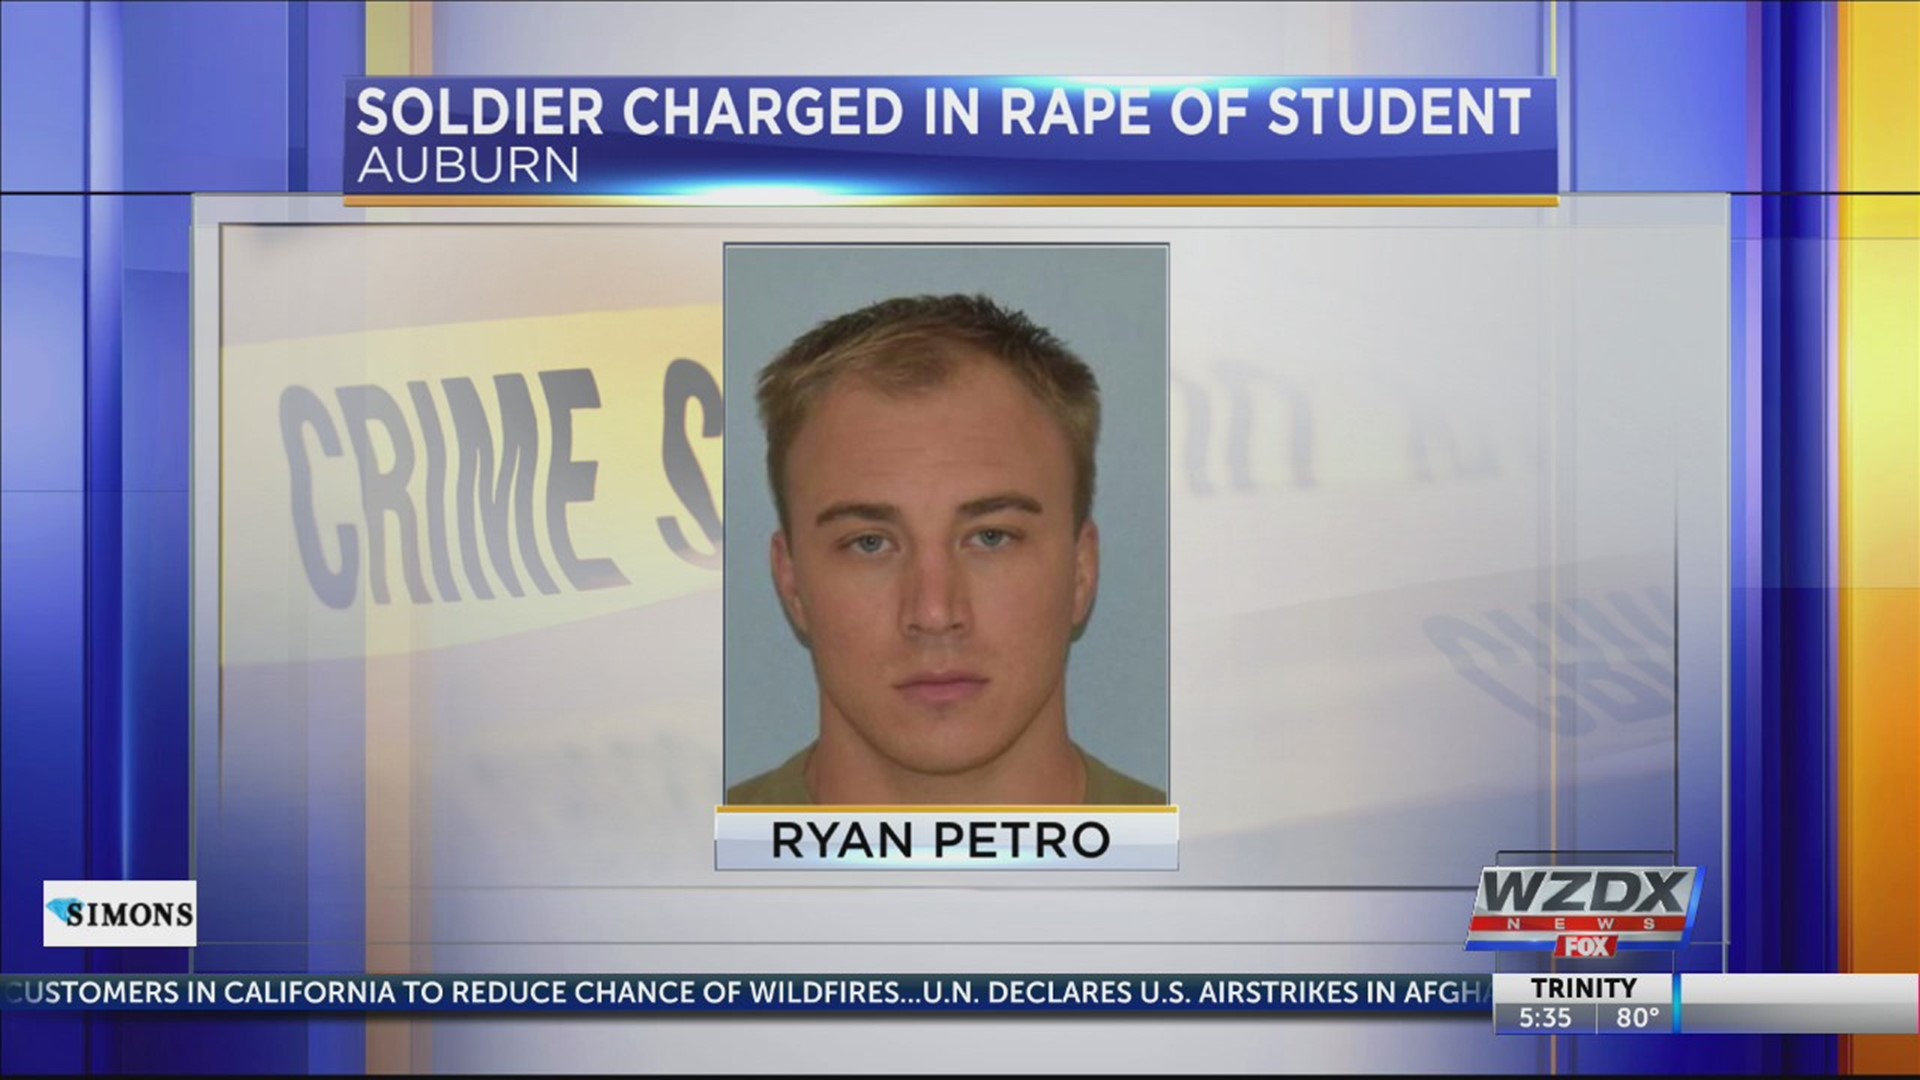 A deployed soldier accused of raping an Auburn University student is arrested.